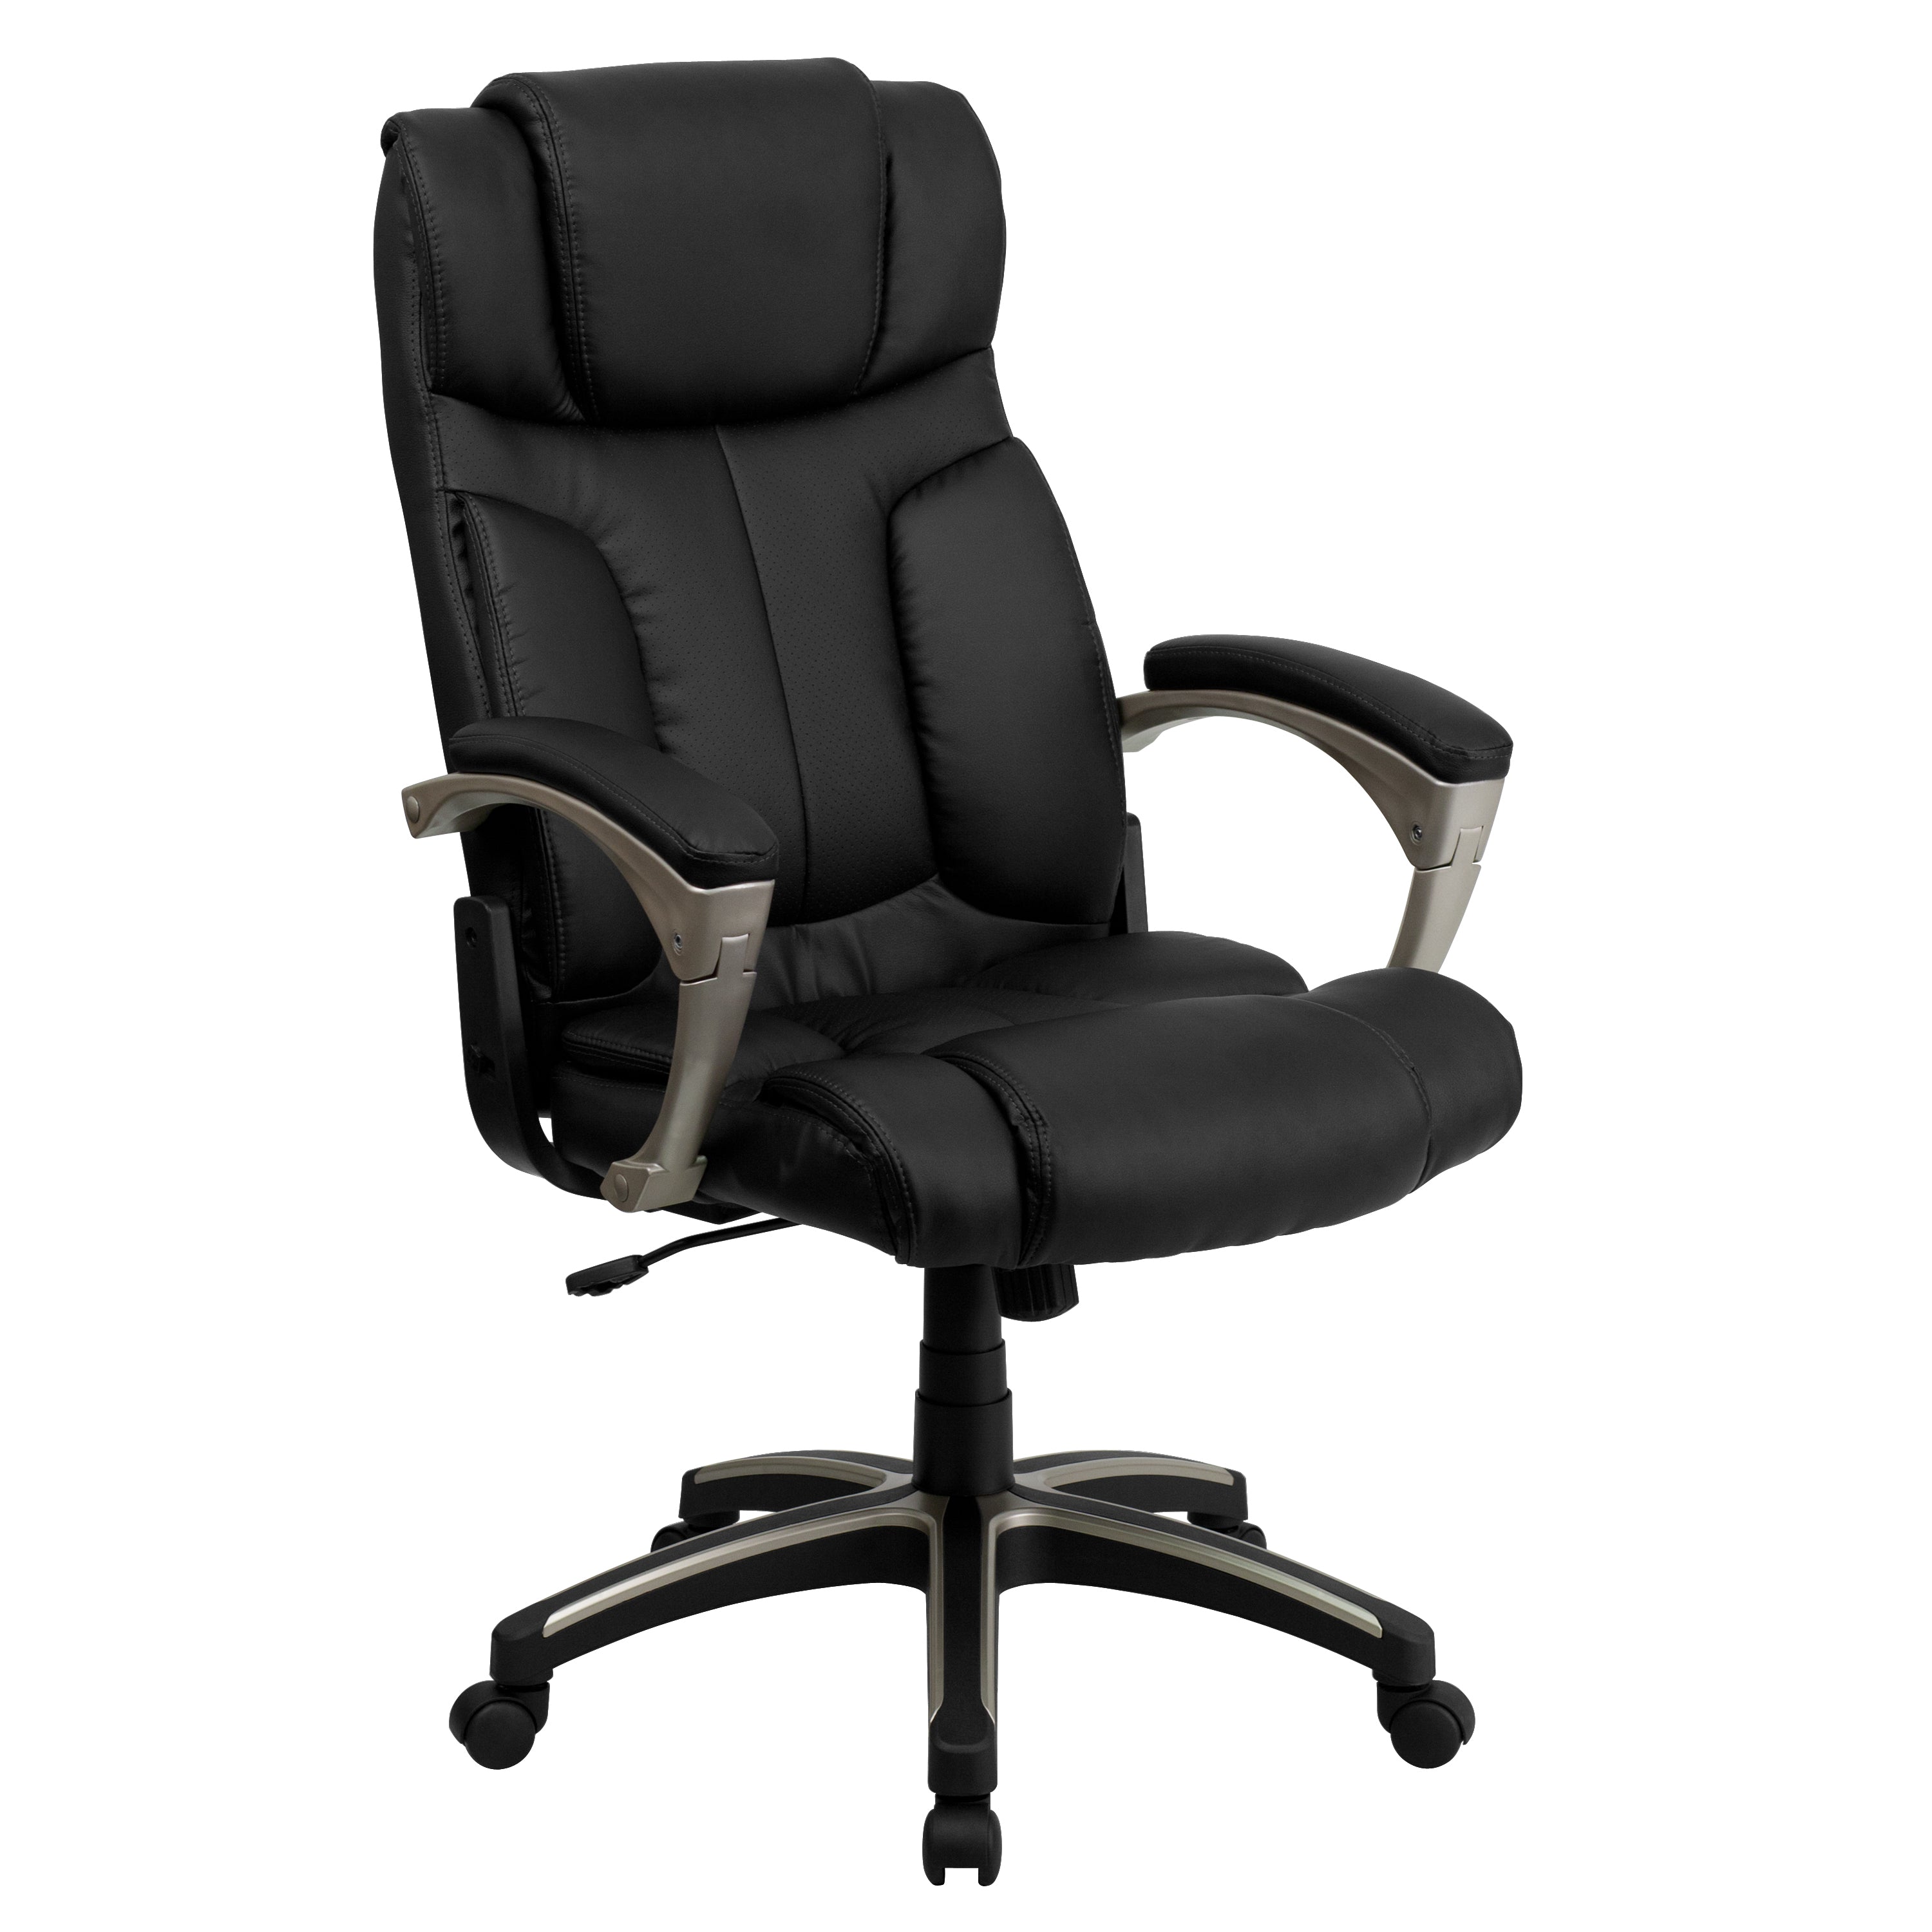 High Back Folding LeatherSoft Executive Swivel Office Chair with Arms-Office Chair-Flash Furniture-Wall2Wall Furnishings